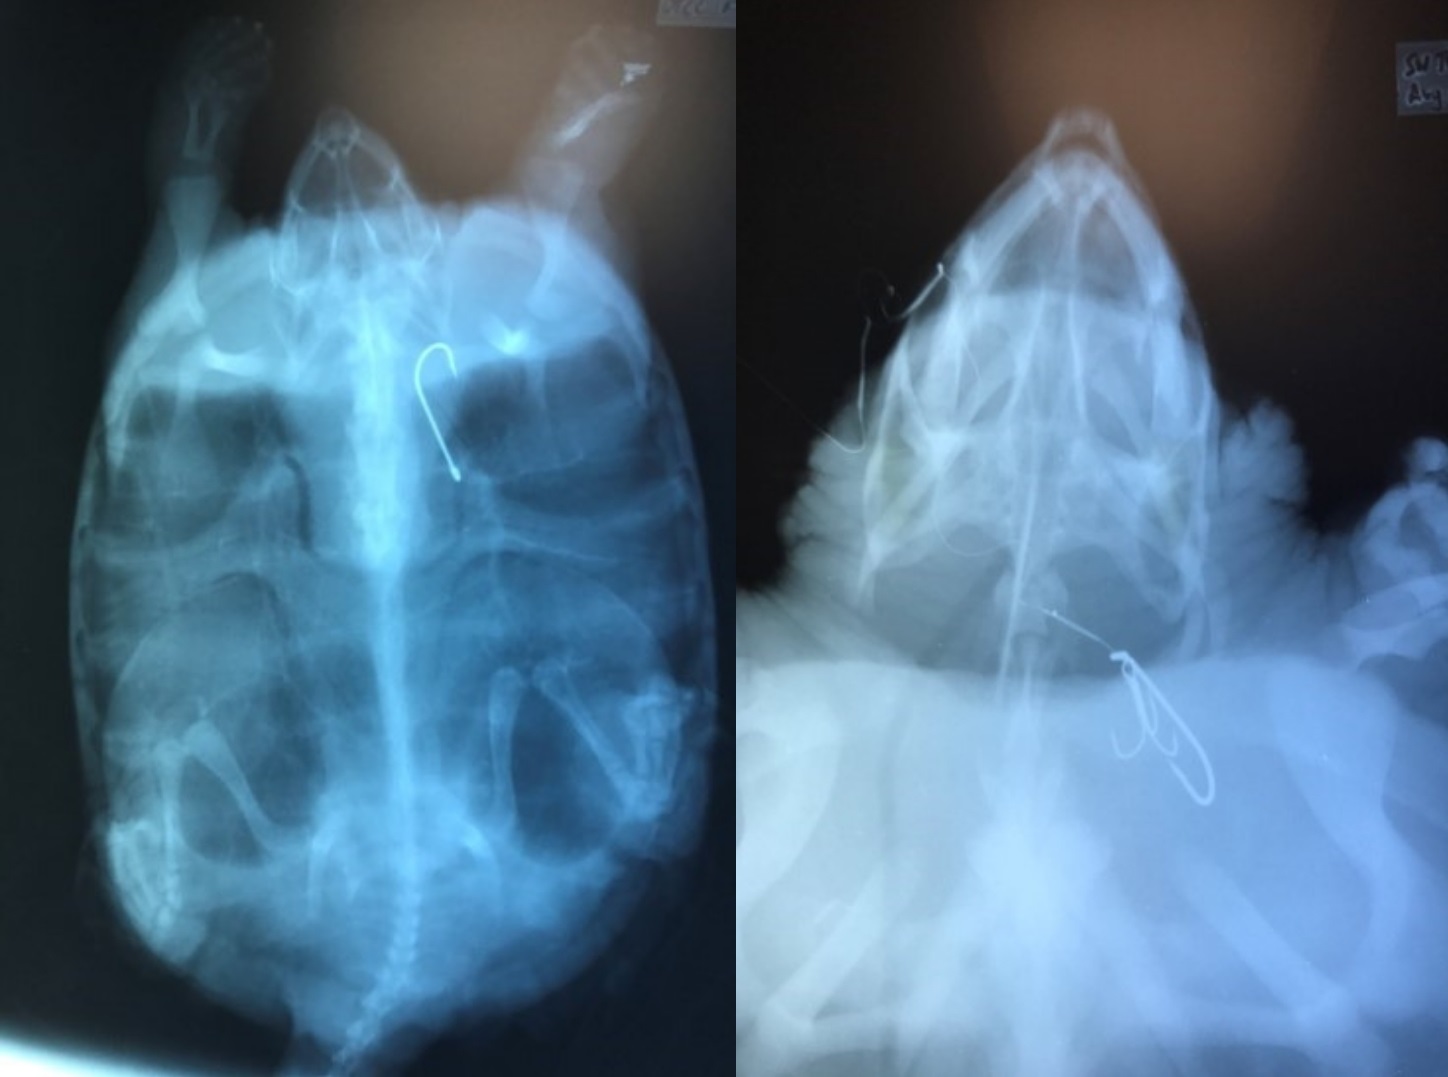 x-ray of hooks in turtles